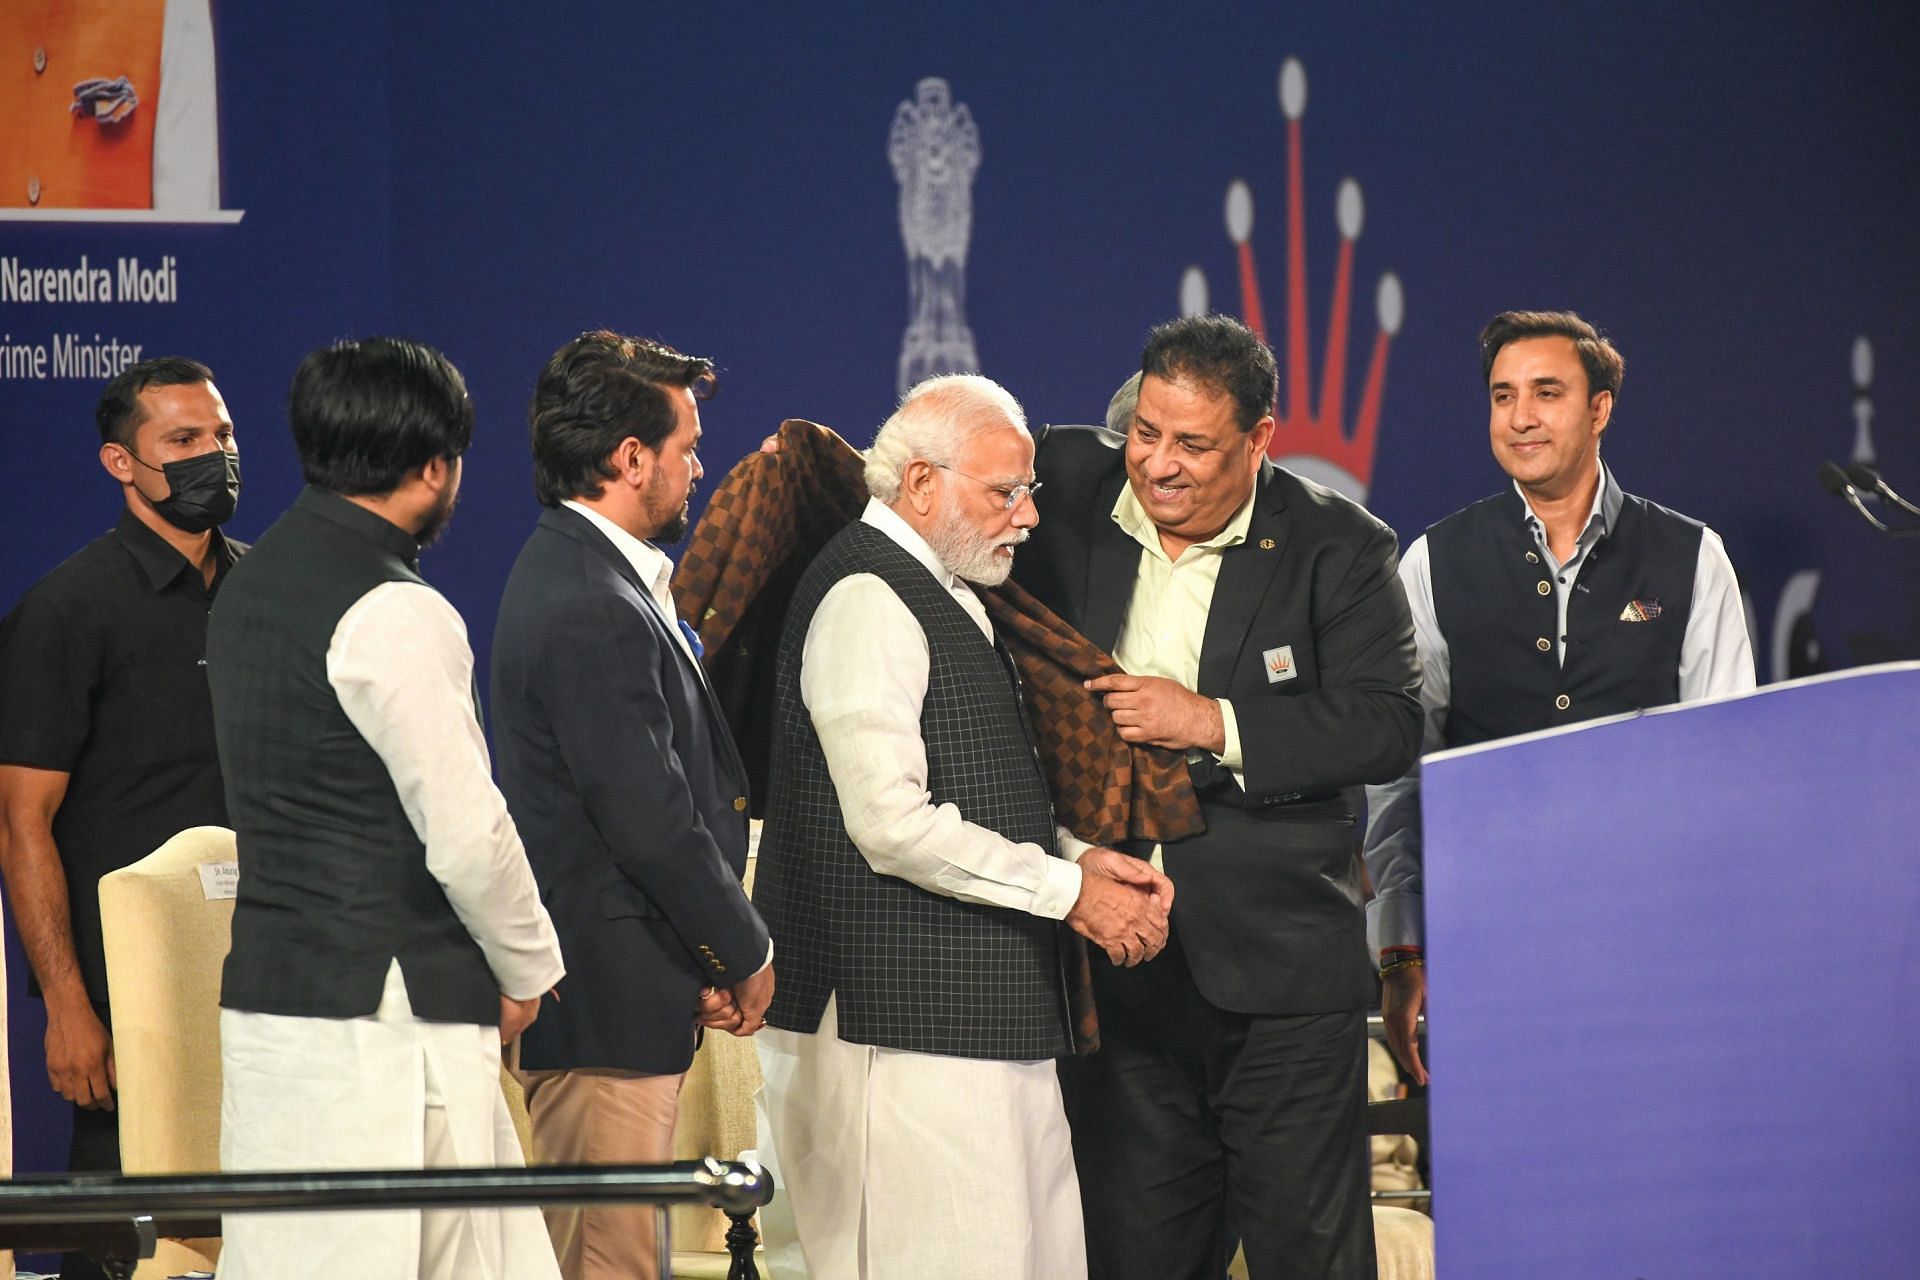 All India Chess Federation secretary Bharat Singh Chauhan felicitating Prime Minister Narendra Modi as other officials look on in New Delhi during Chess Olympiad Torch Relay. (Pic credit: AICF)